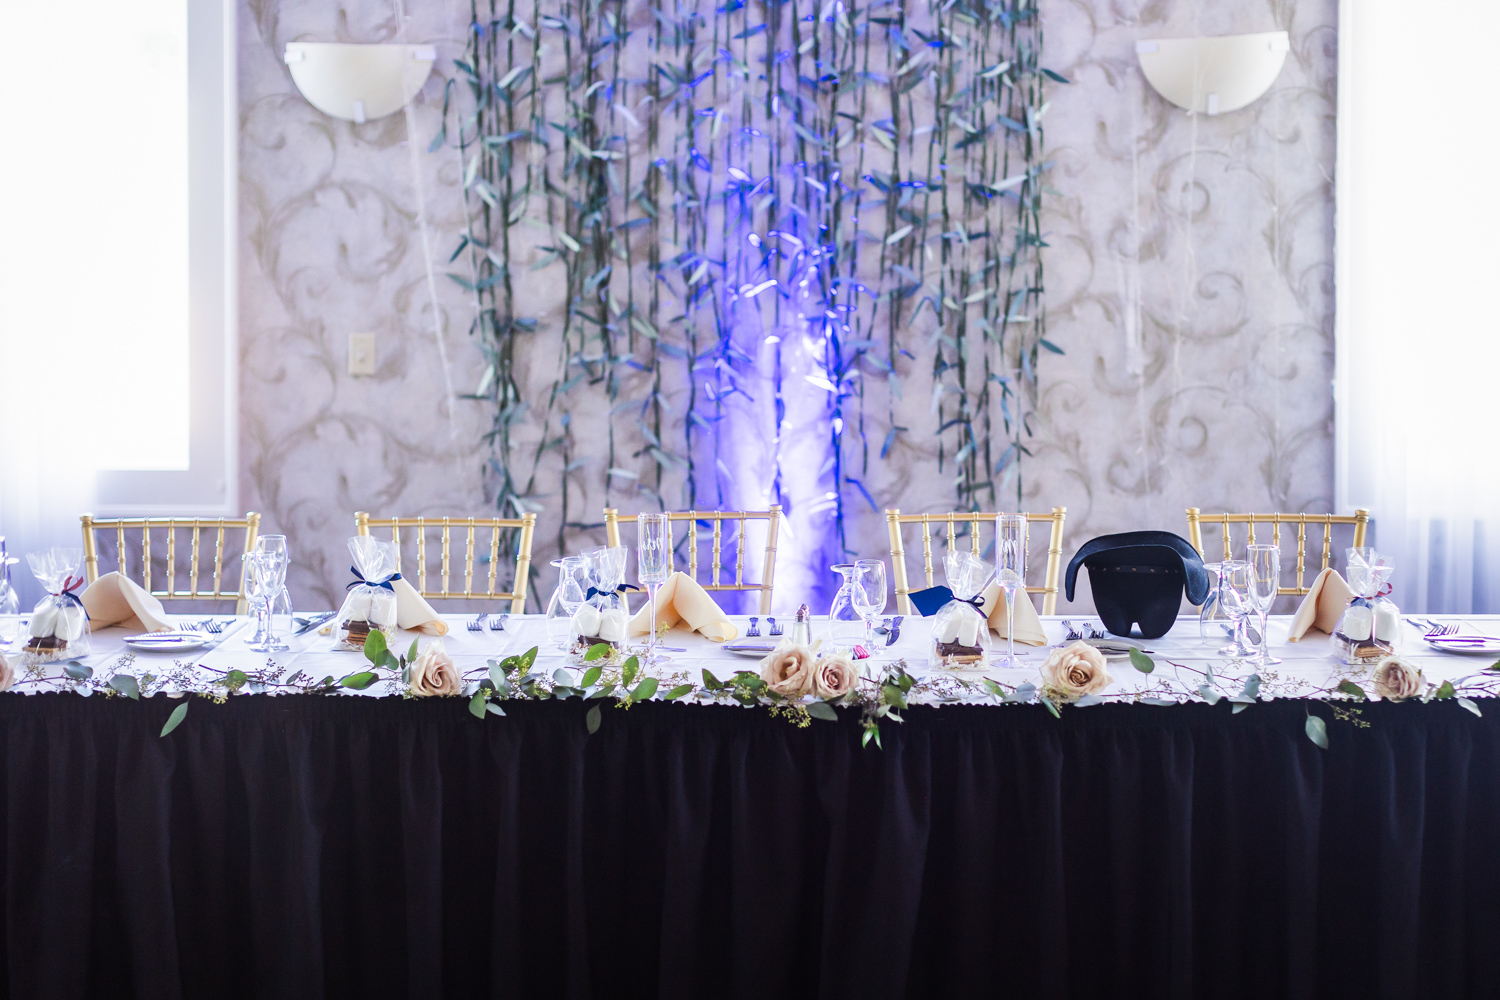 The newlywed's table with a black tablecloth and white flowers on top.